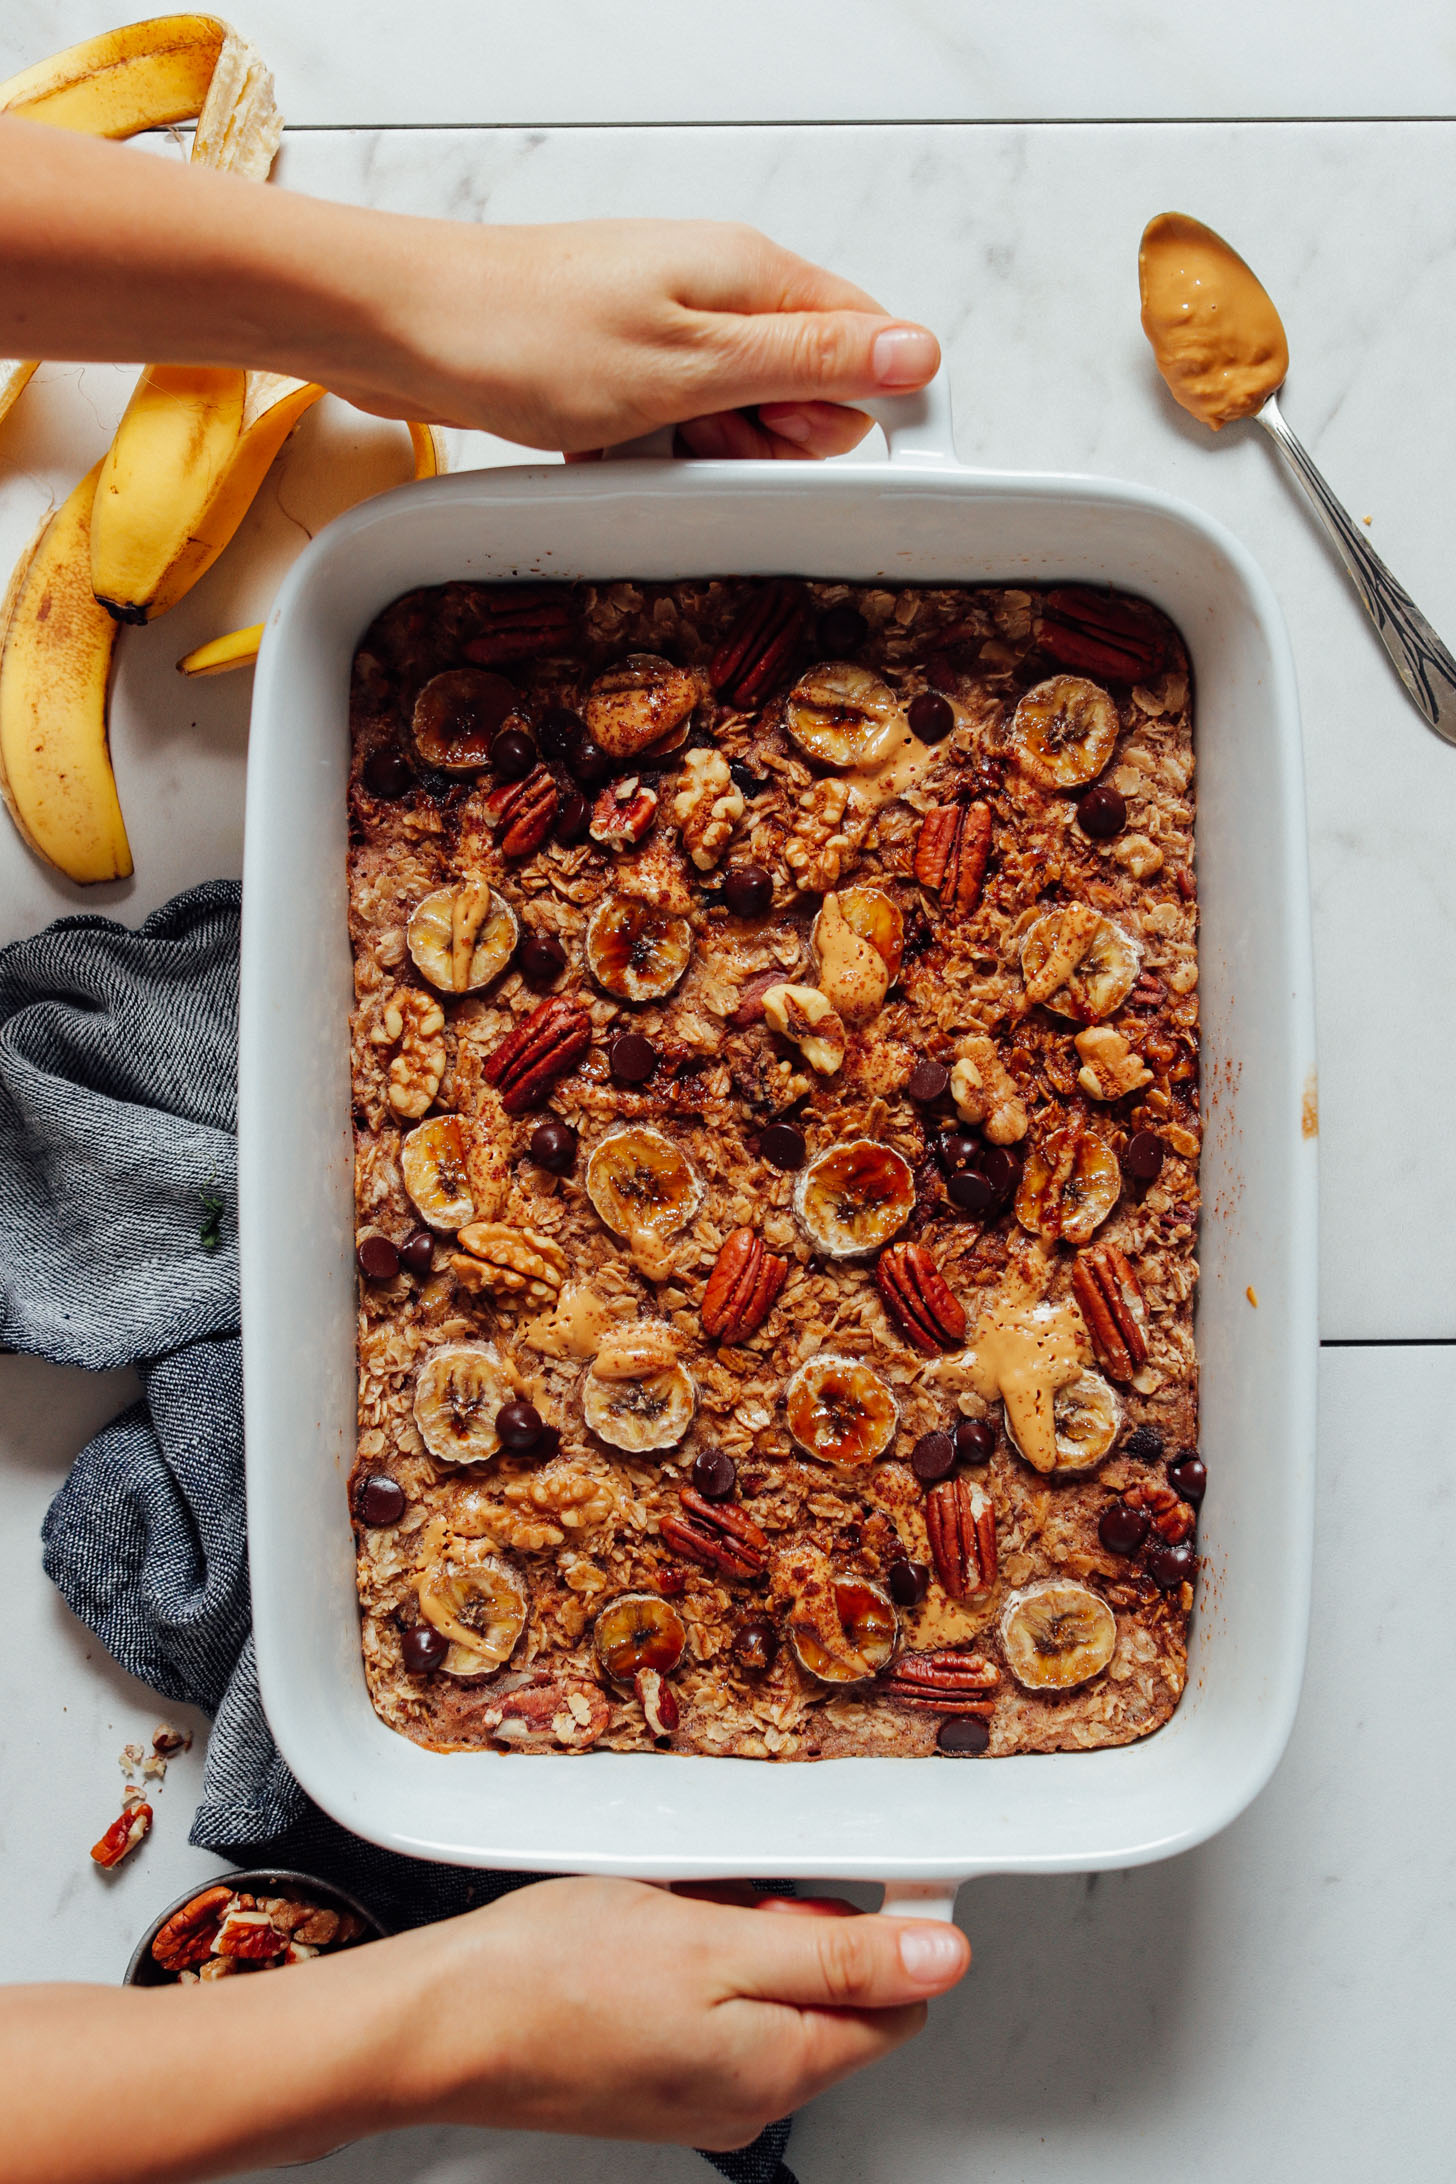 Overhead image of banana baked oatmeal with chocolate and nuts and hands holding the sides of the dish